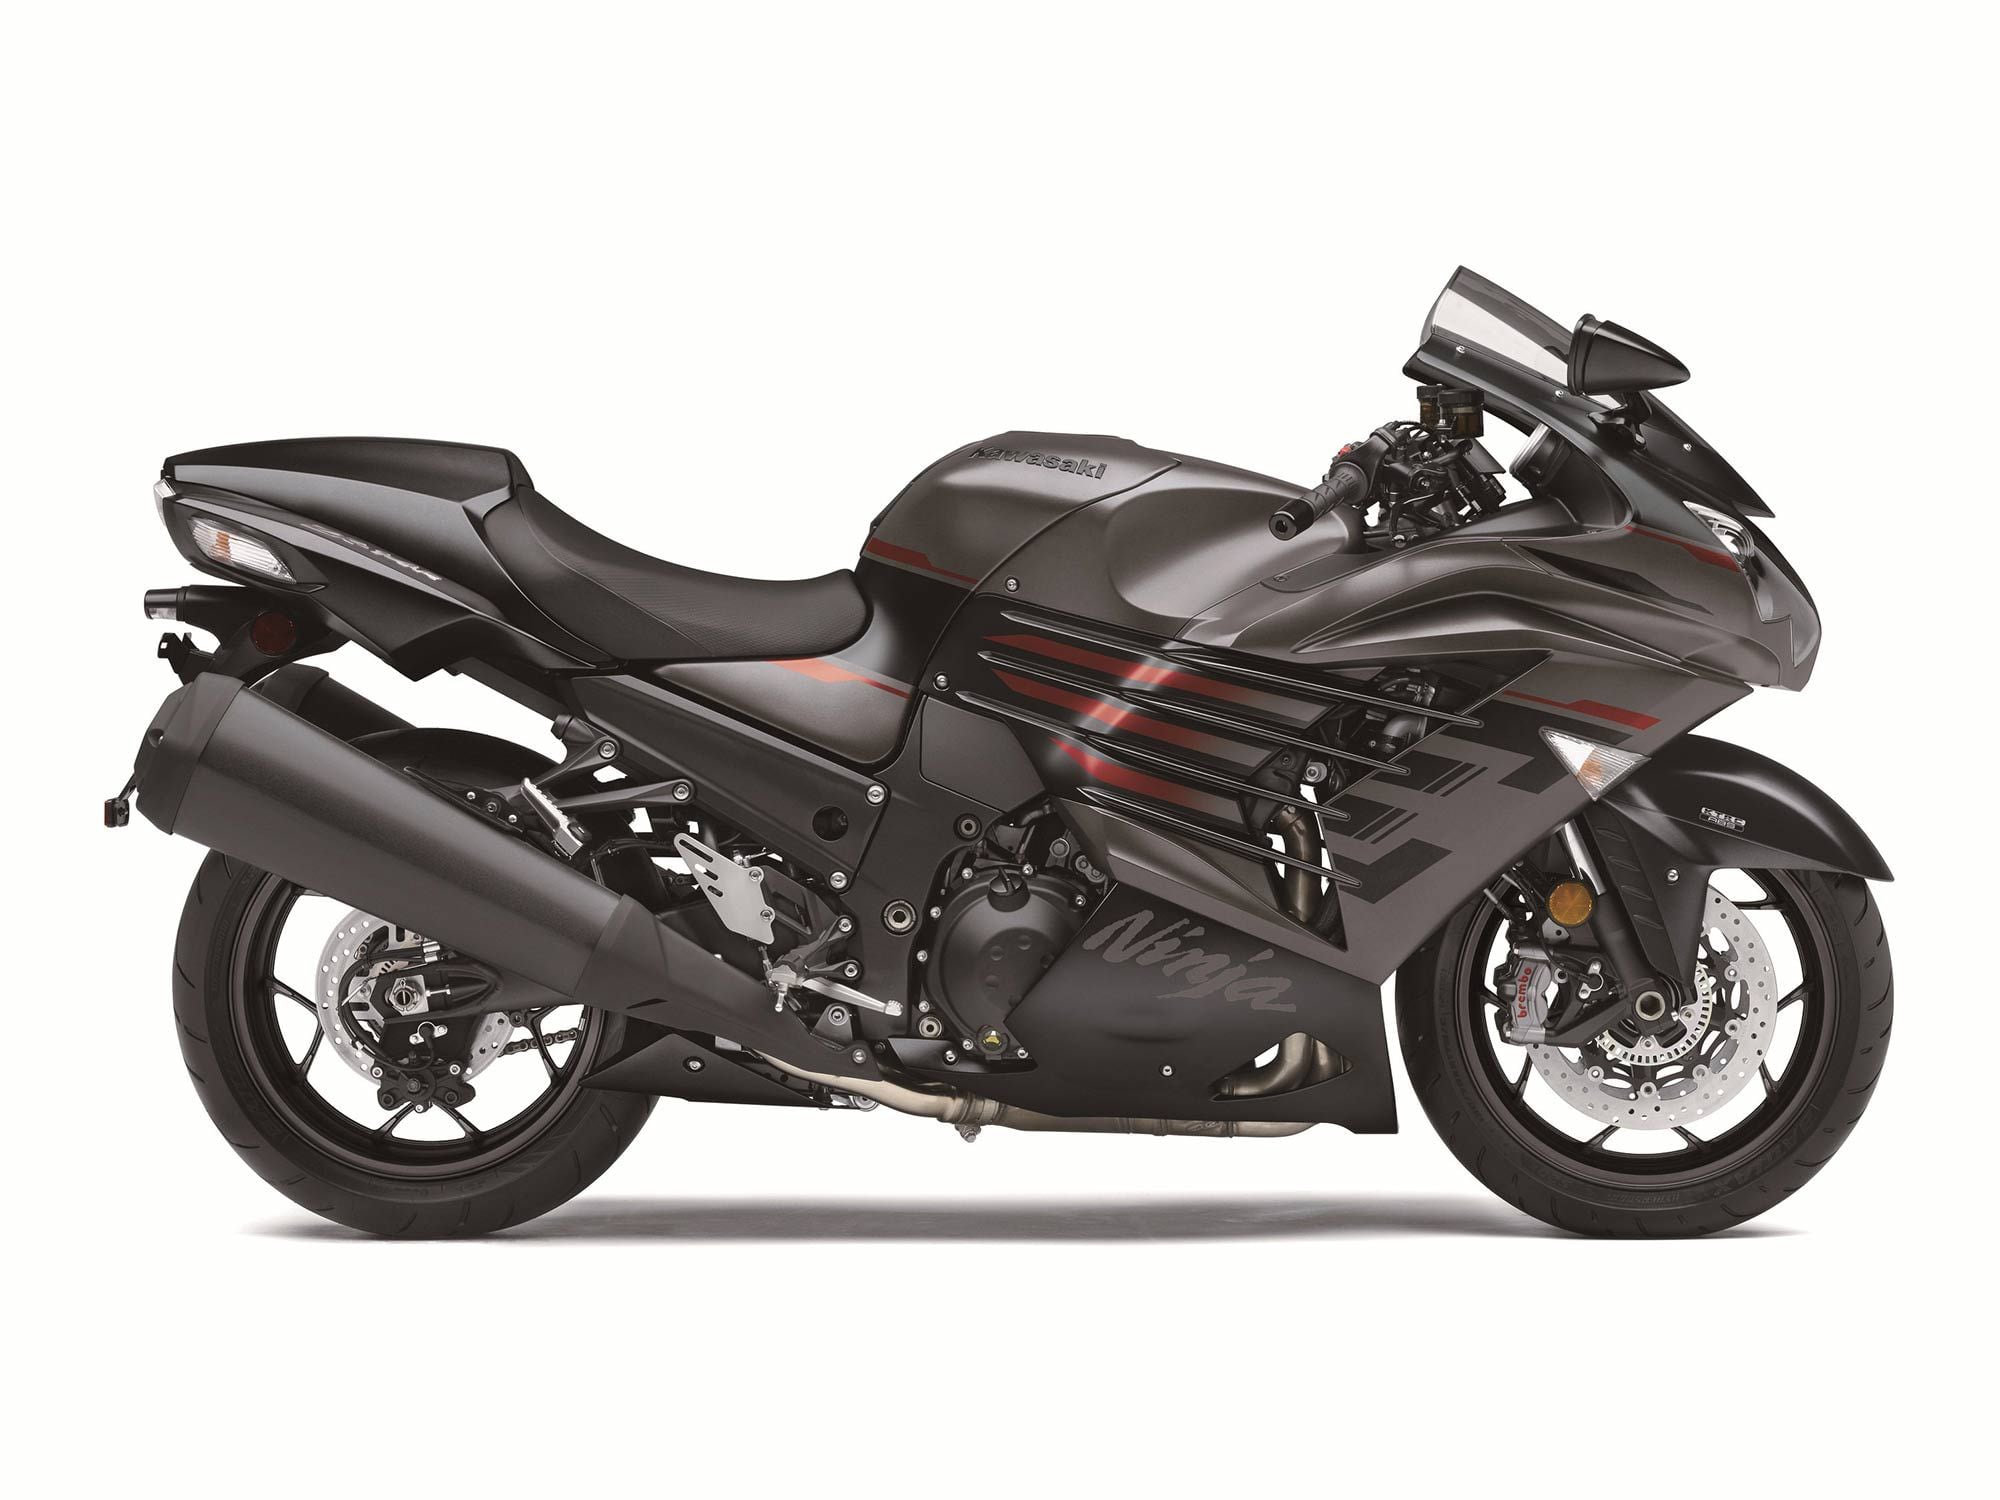 2023 Kawasaki ZX-14R Buyer's Guide: Specs, Photos, Price Cycle World